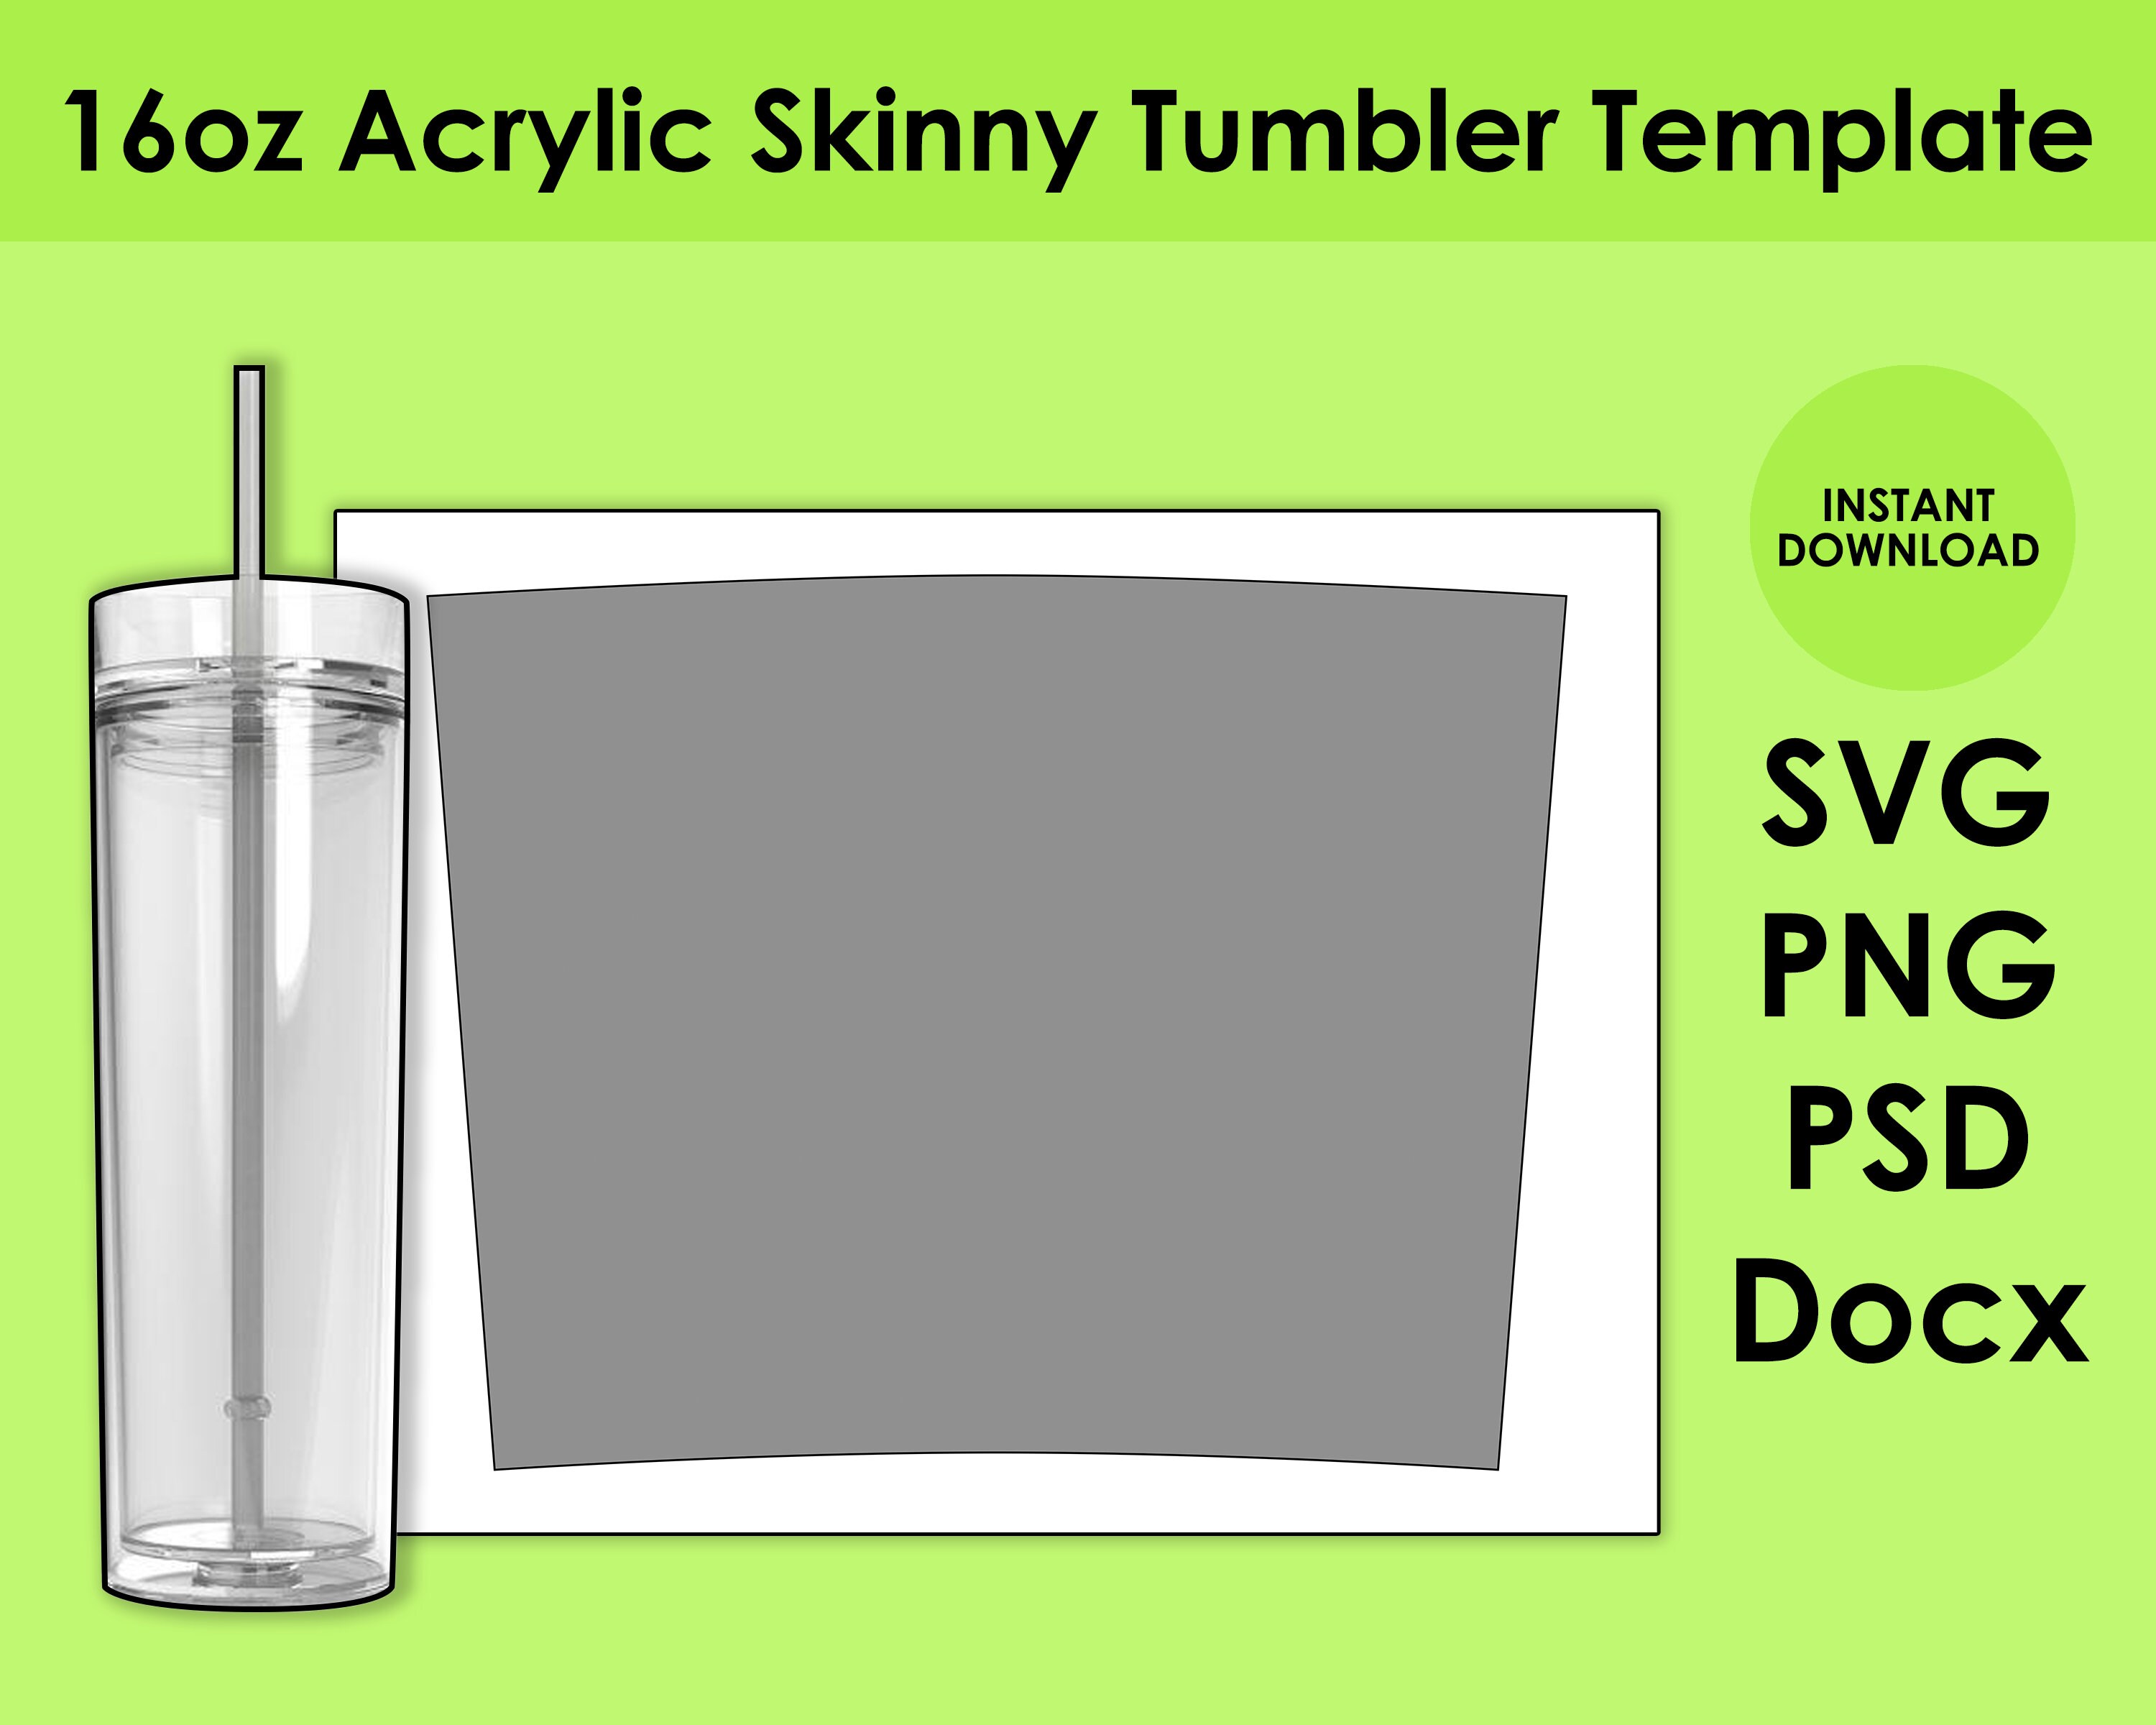 16oz Acrylic Skinny Tumbler Template SVG PNG PSD And DOCx Etsy